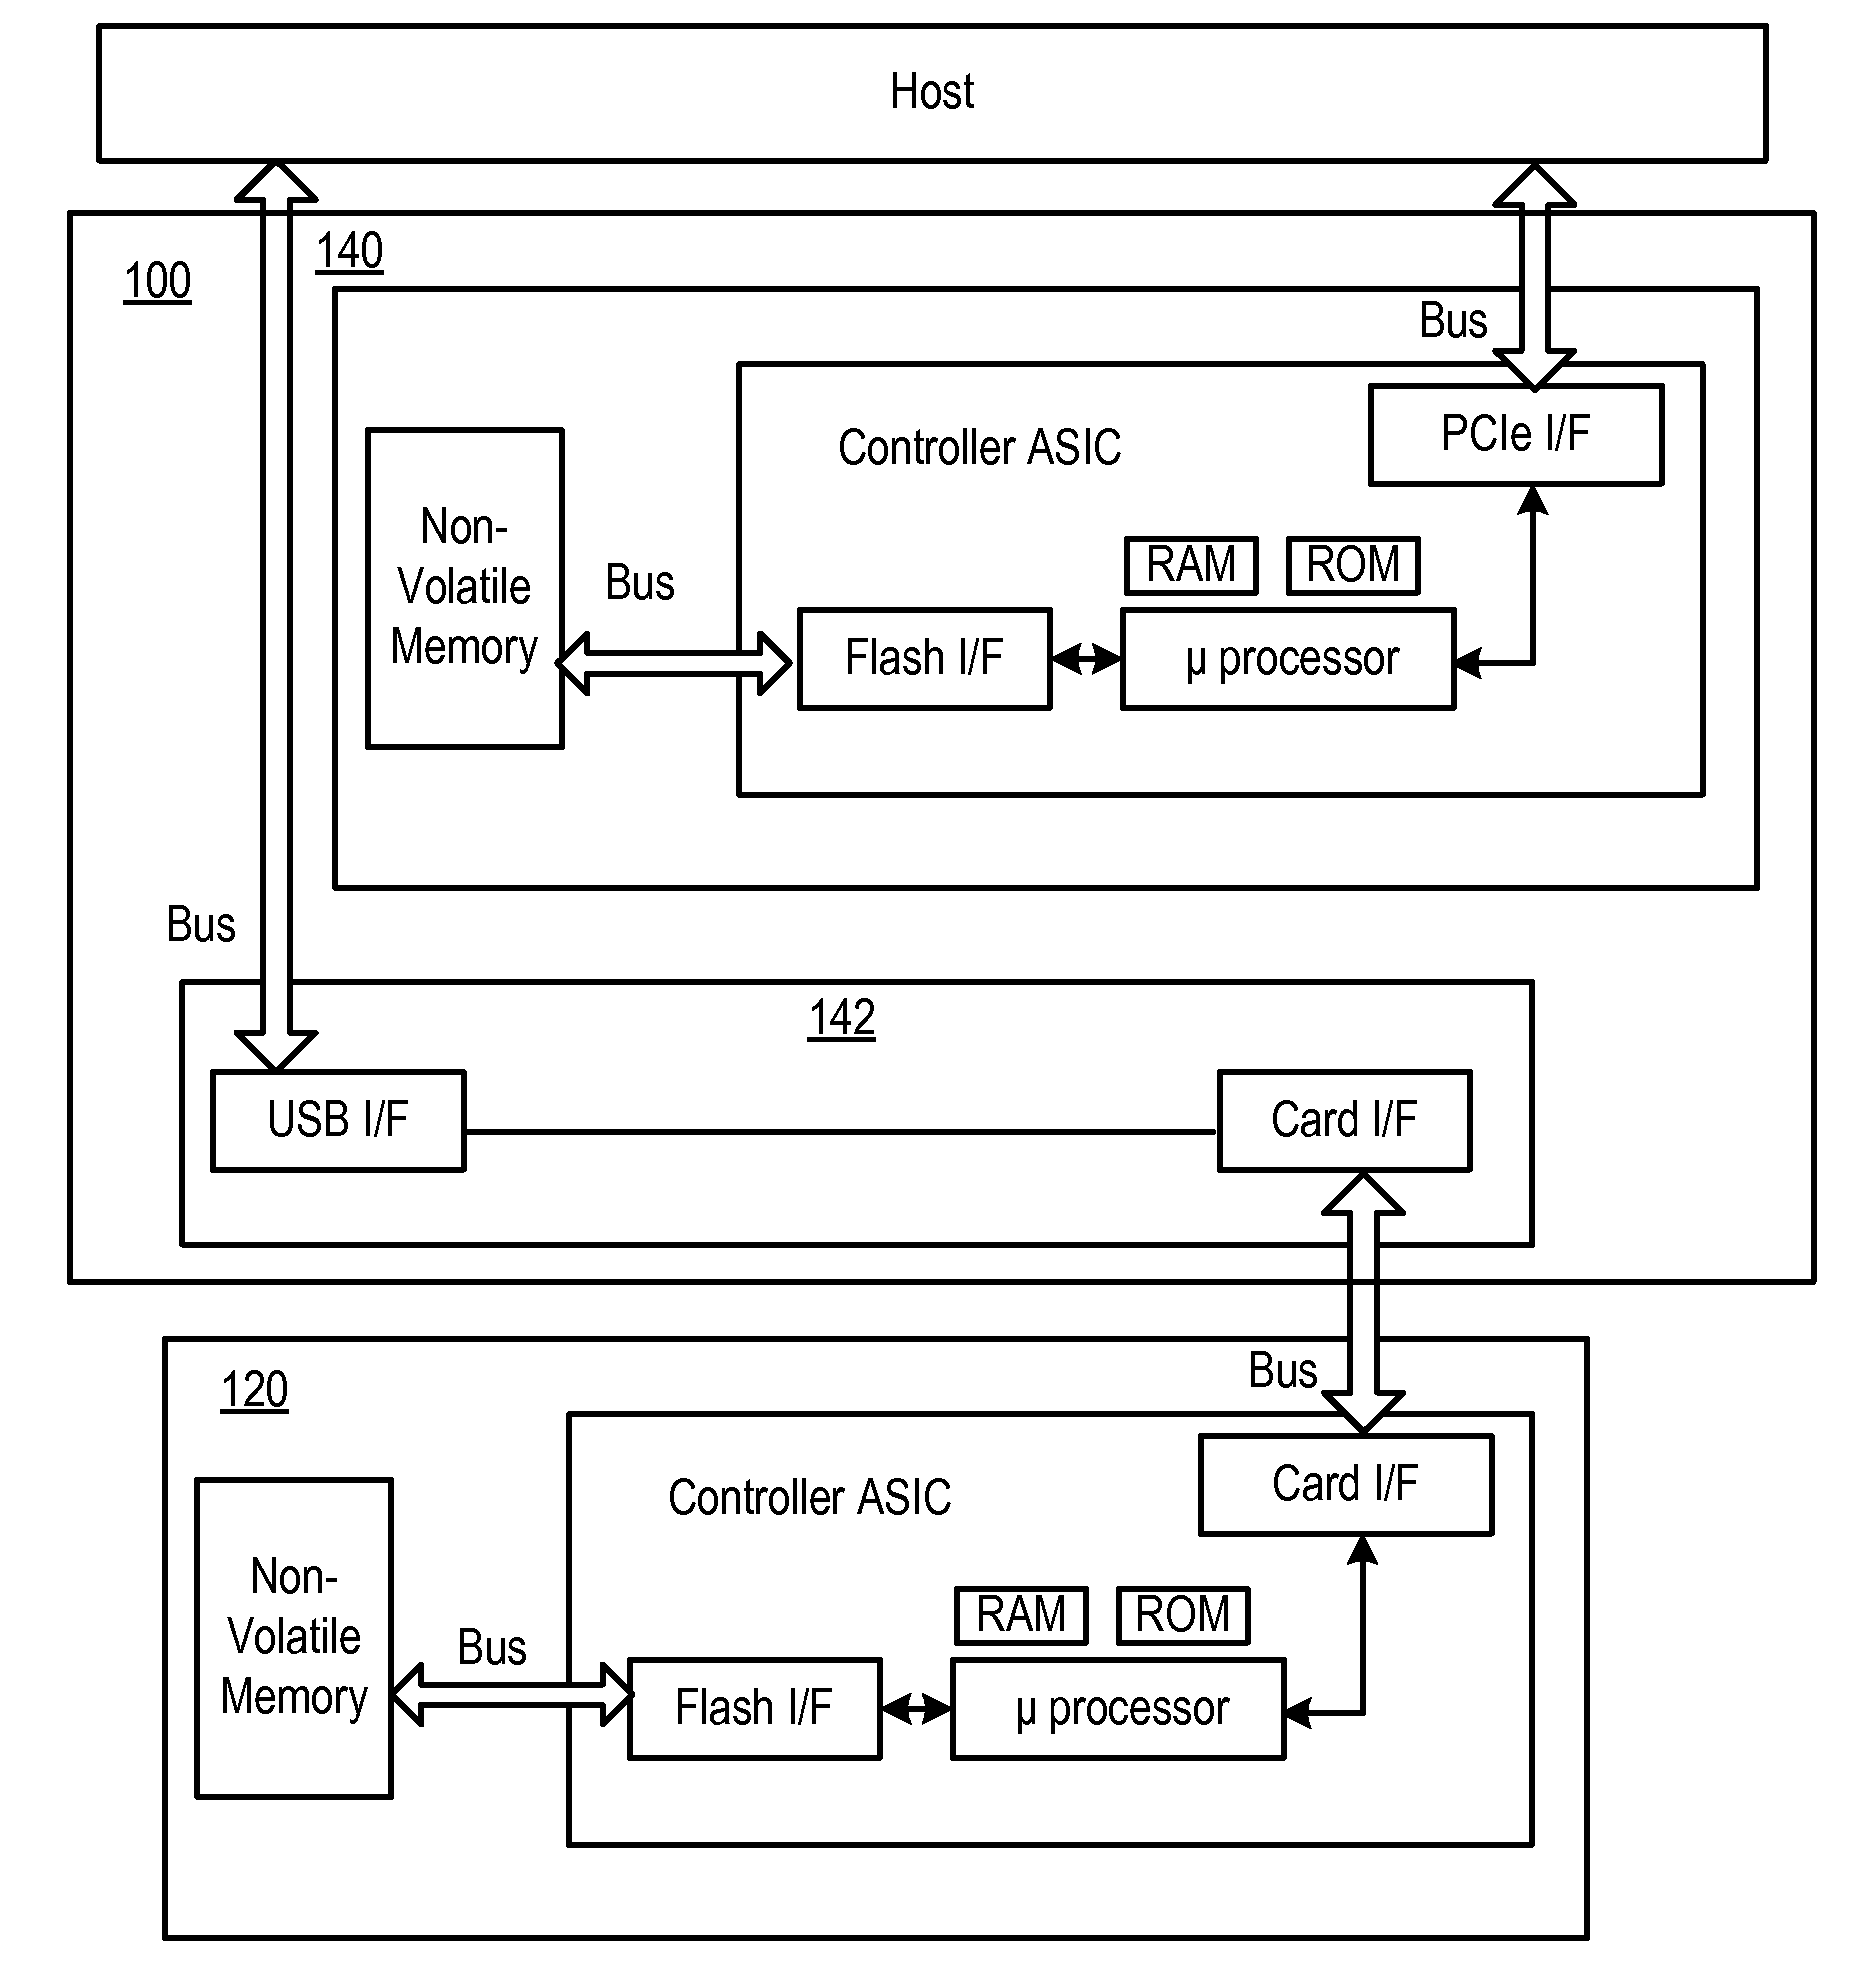 Method of using the dual bus interface in an expresscard slot